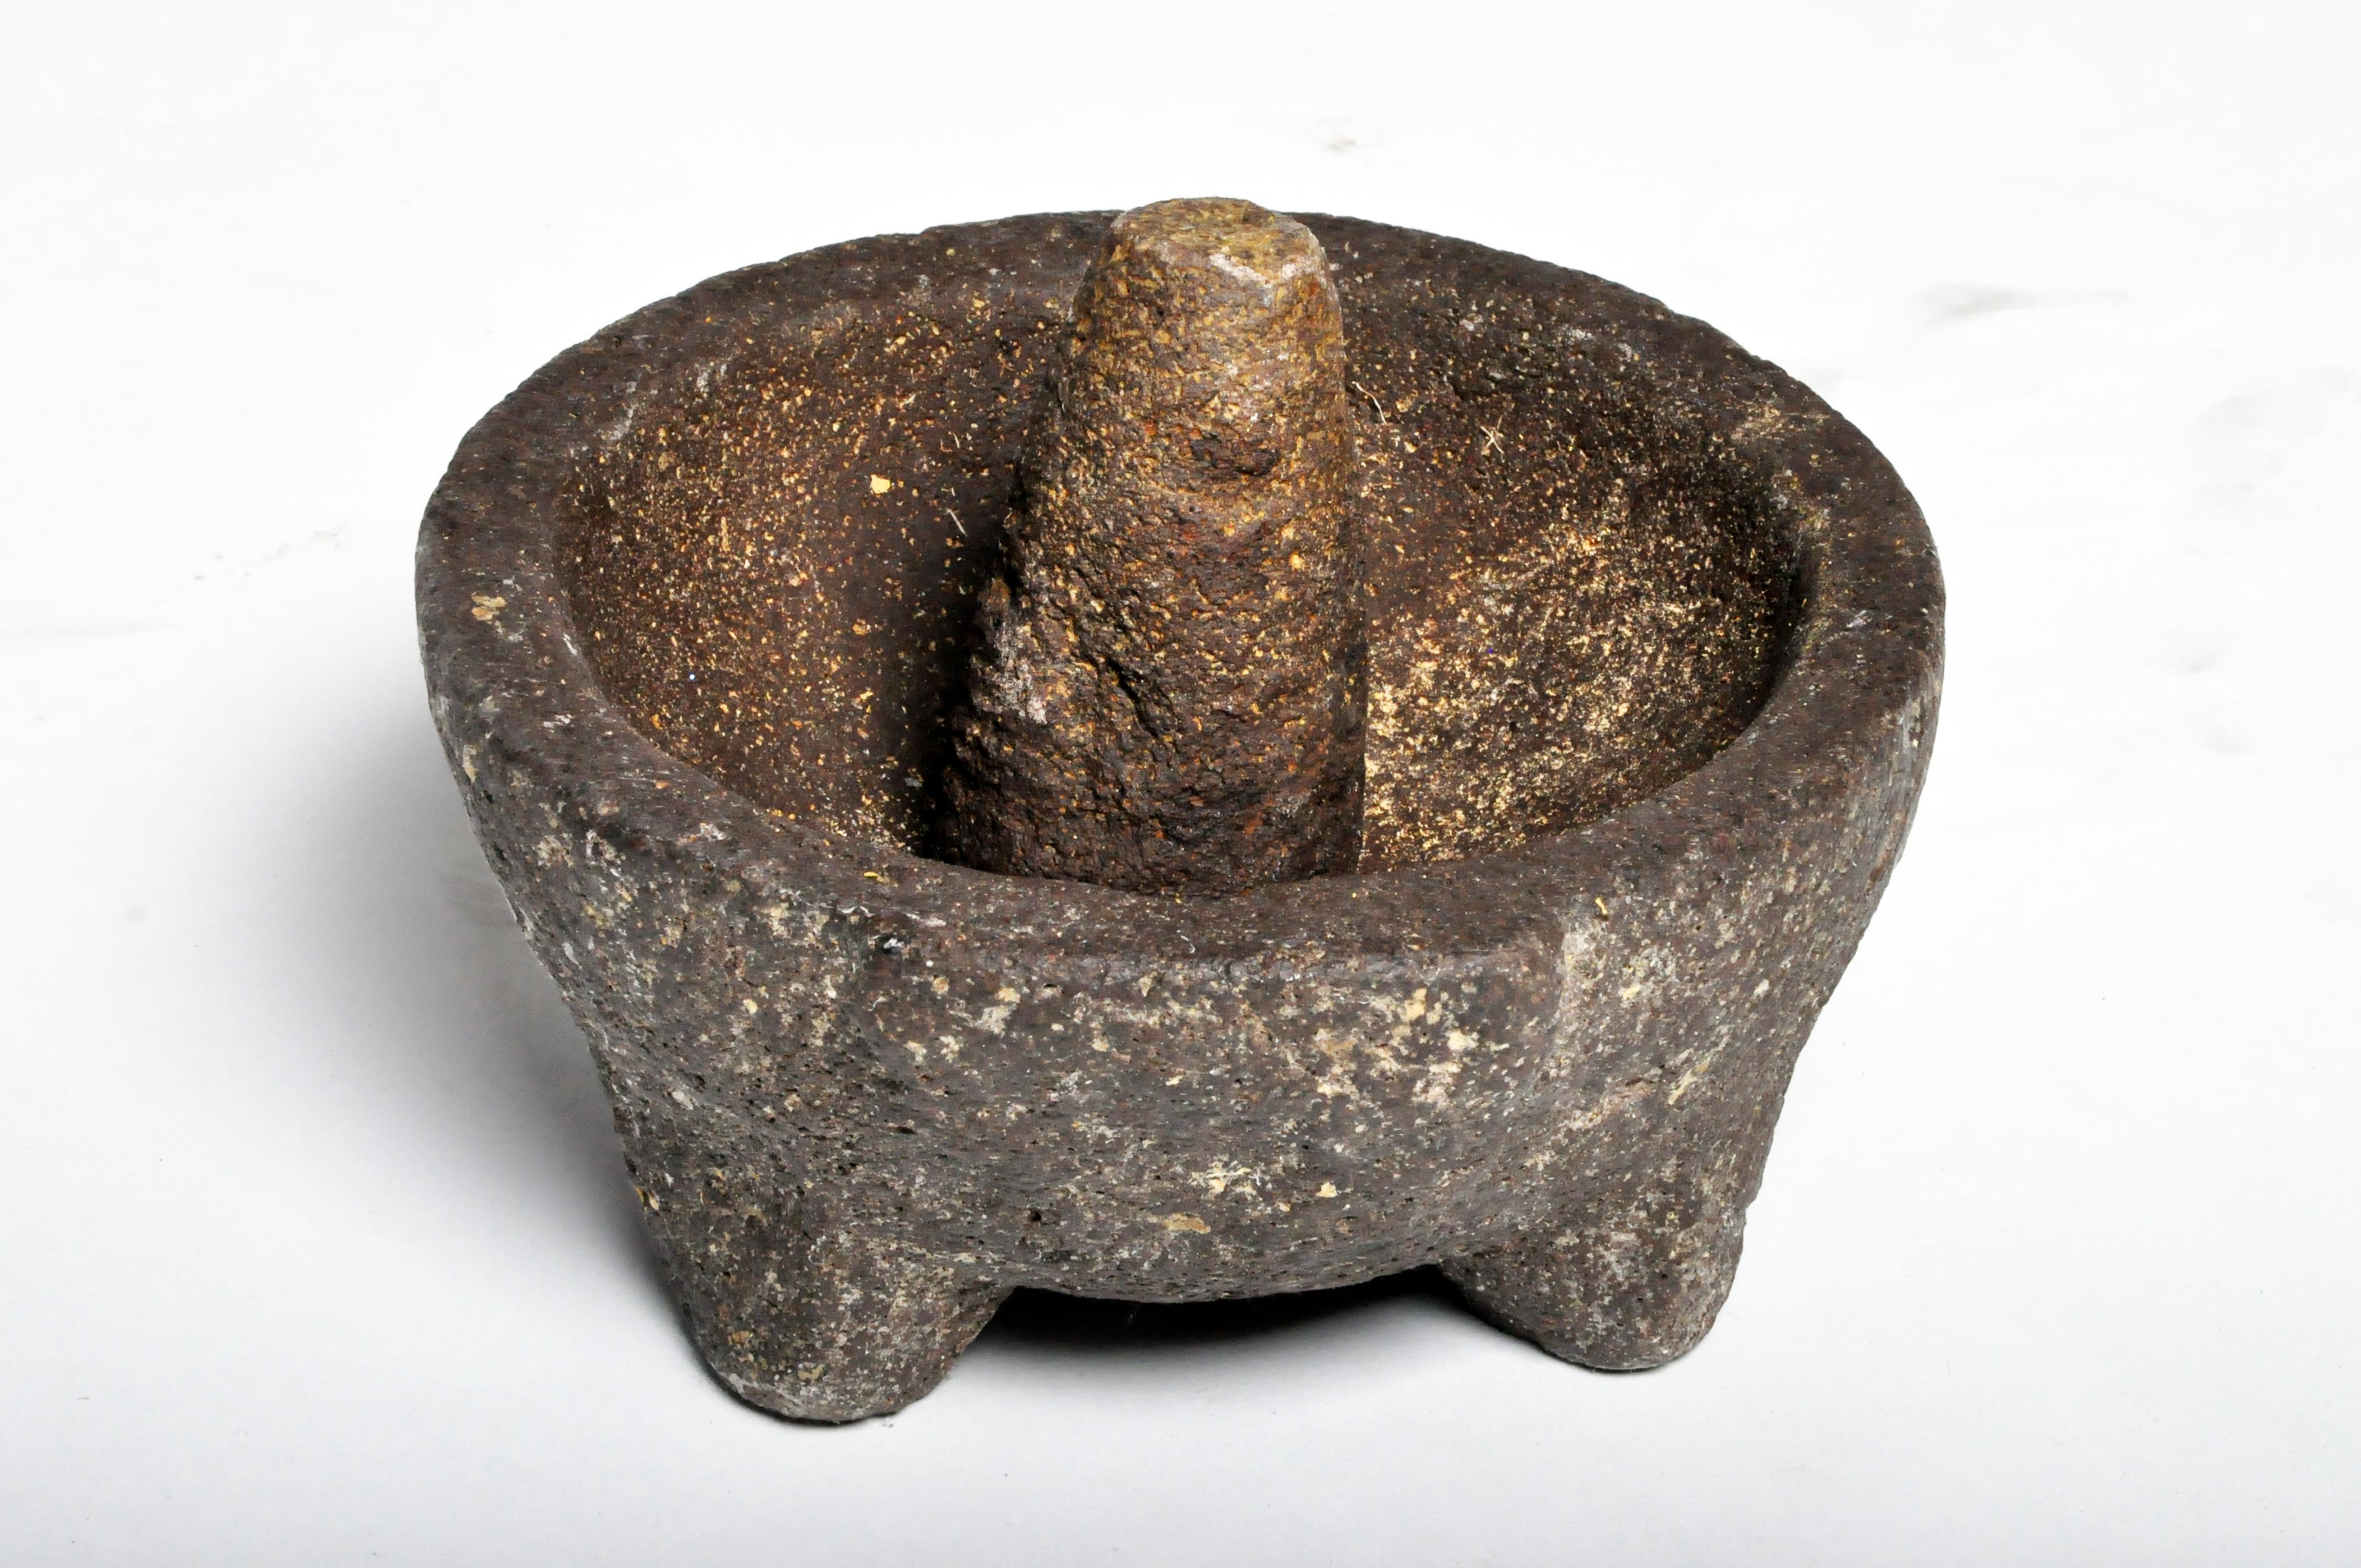 Indian Stone Mortar with Pestle